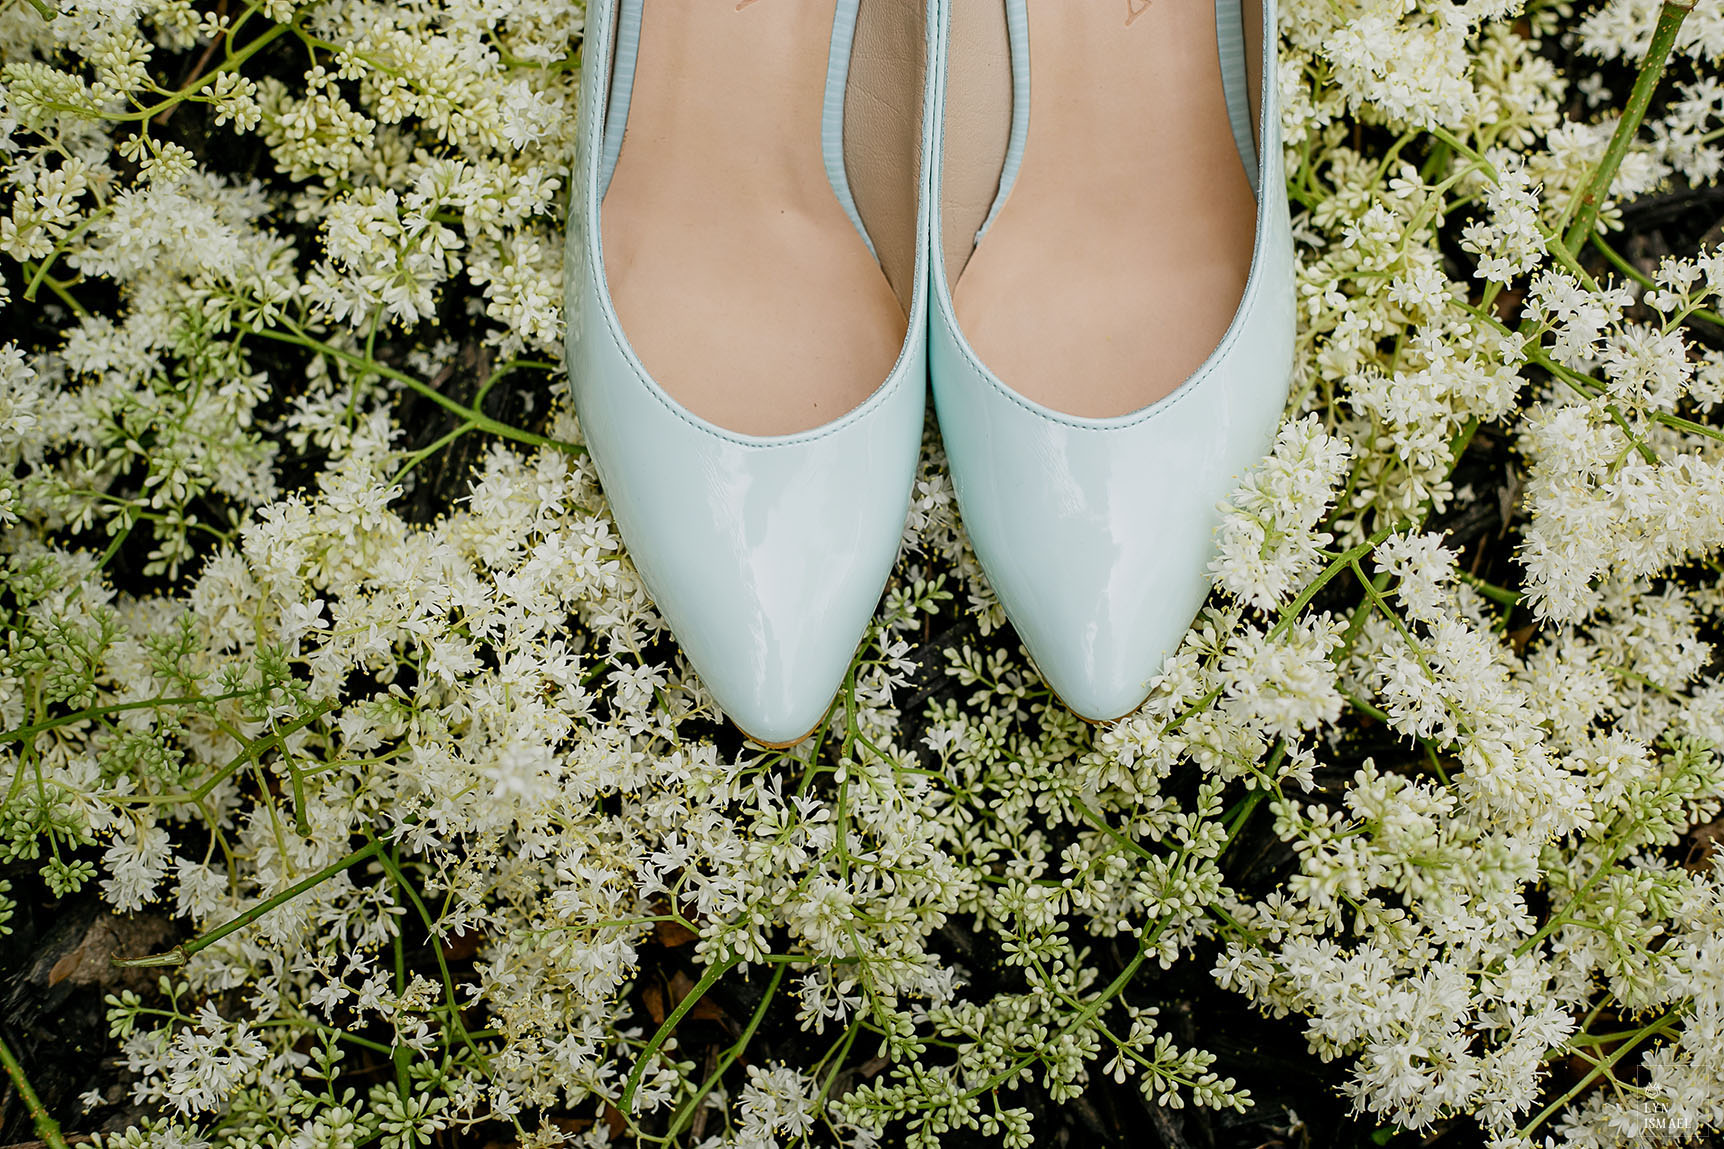 Aqua shoes on a bed of flowers